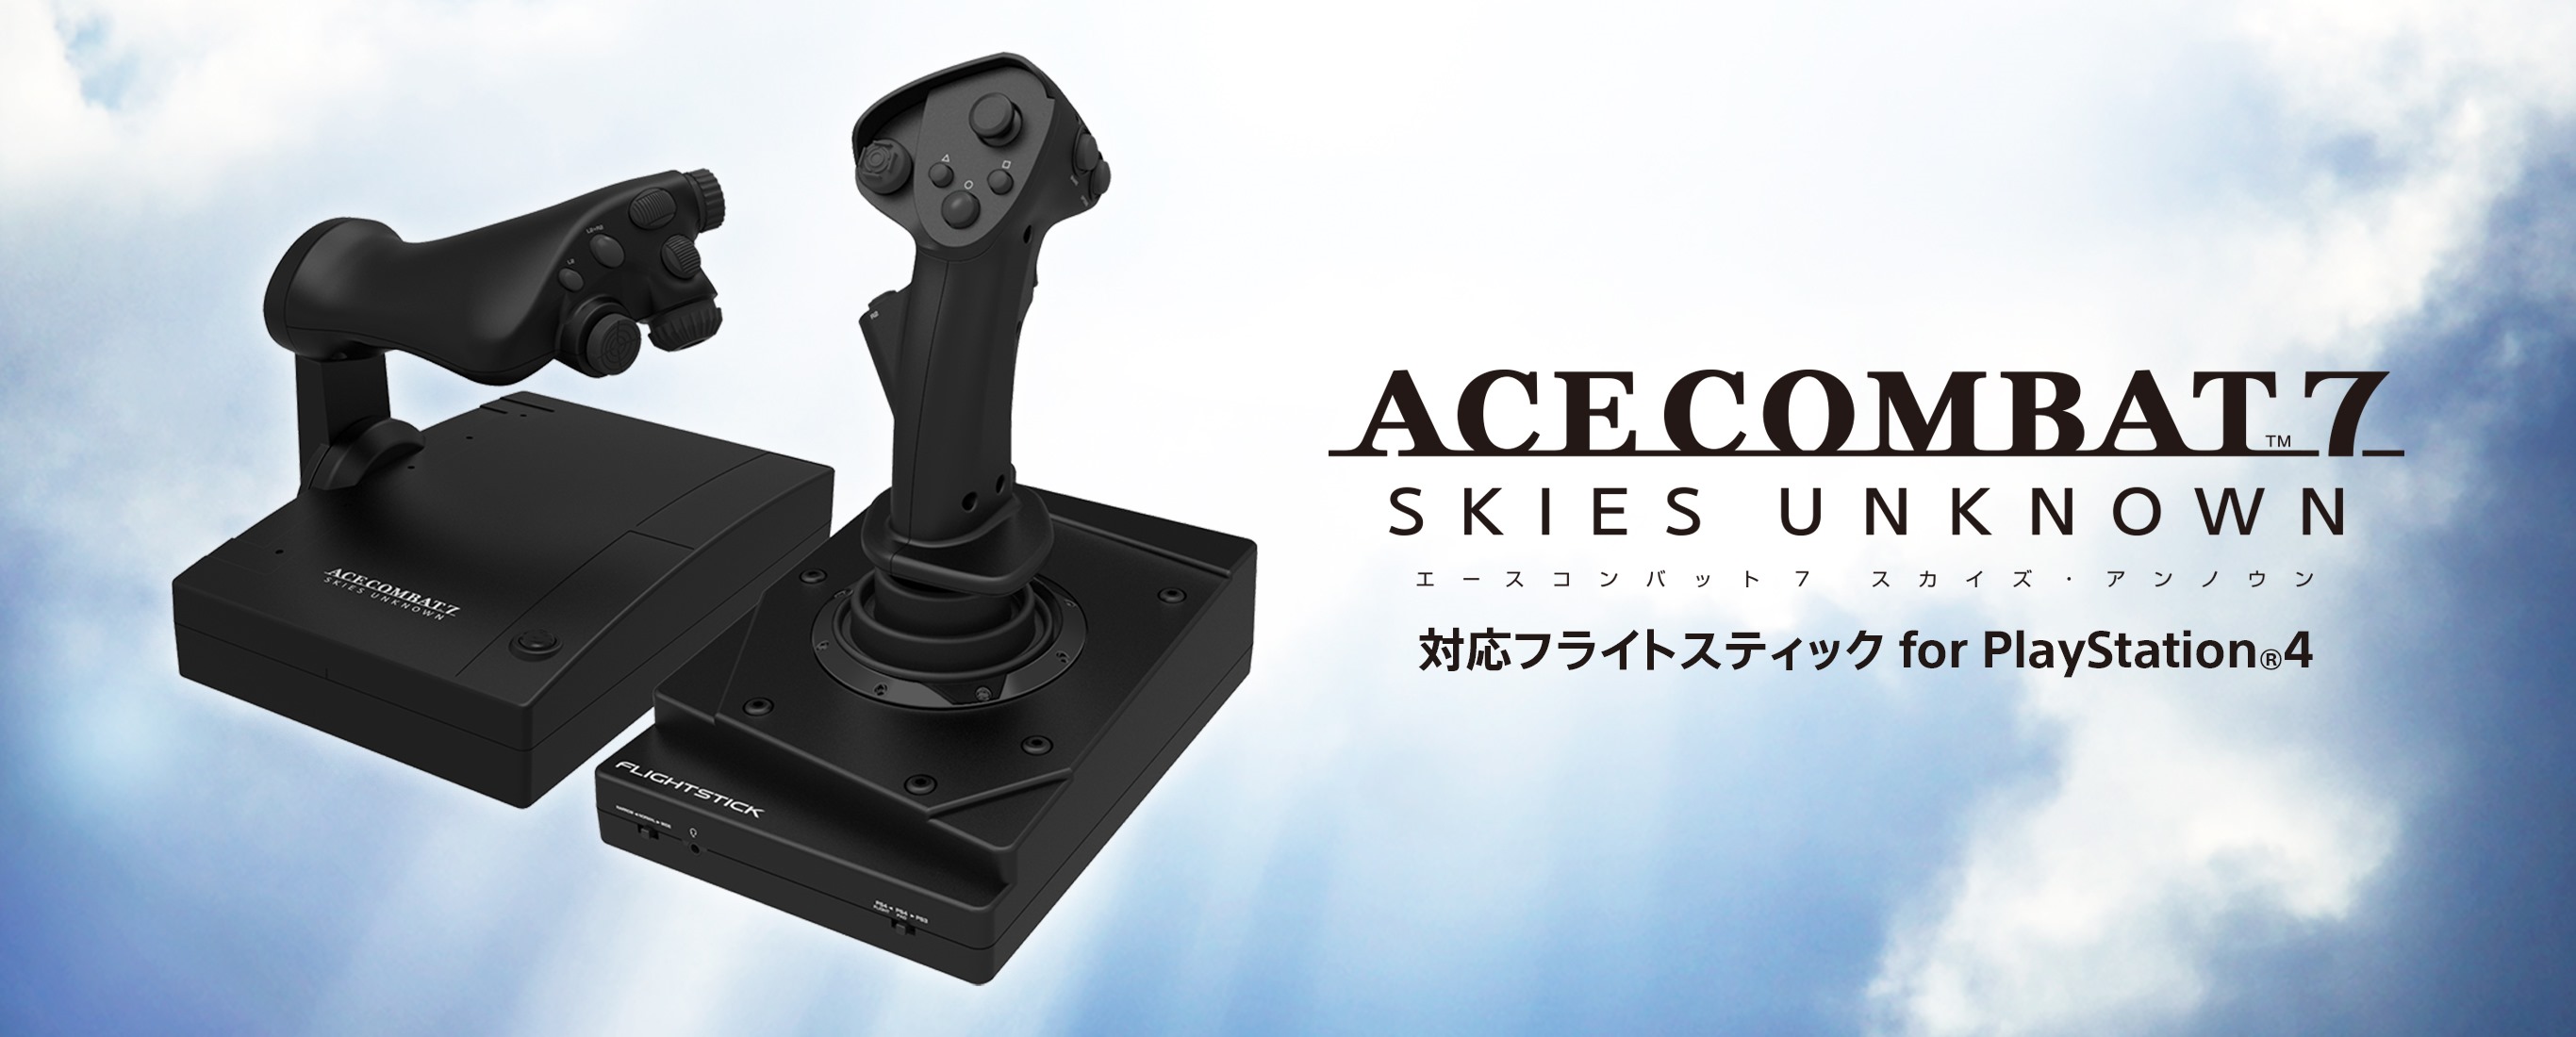 voelen Thuisland Glad Take A Look At The Two Flight Sticks Announced For Ace Combat 7 - Siliconera